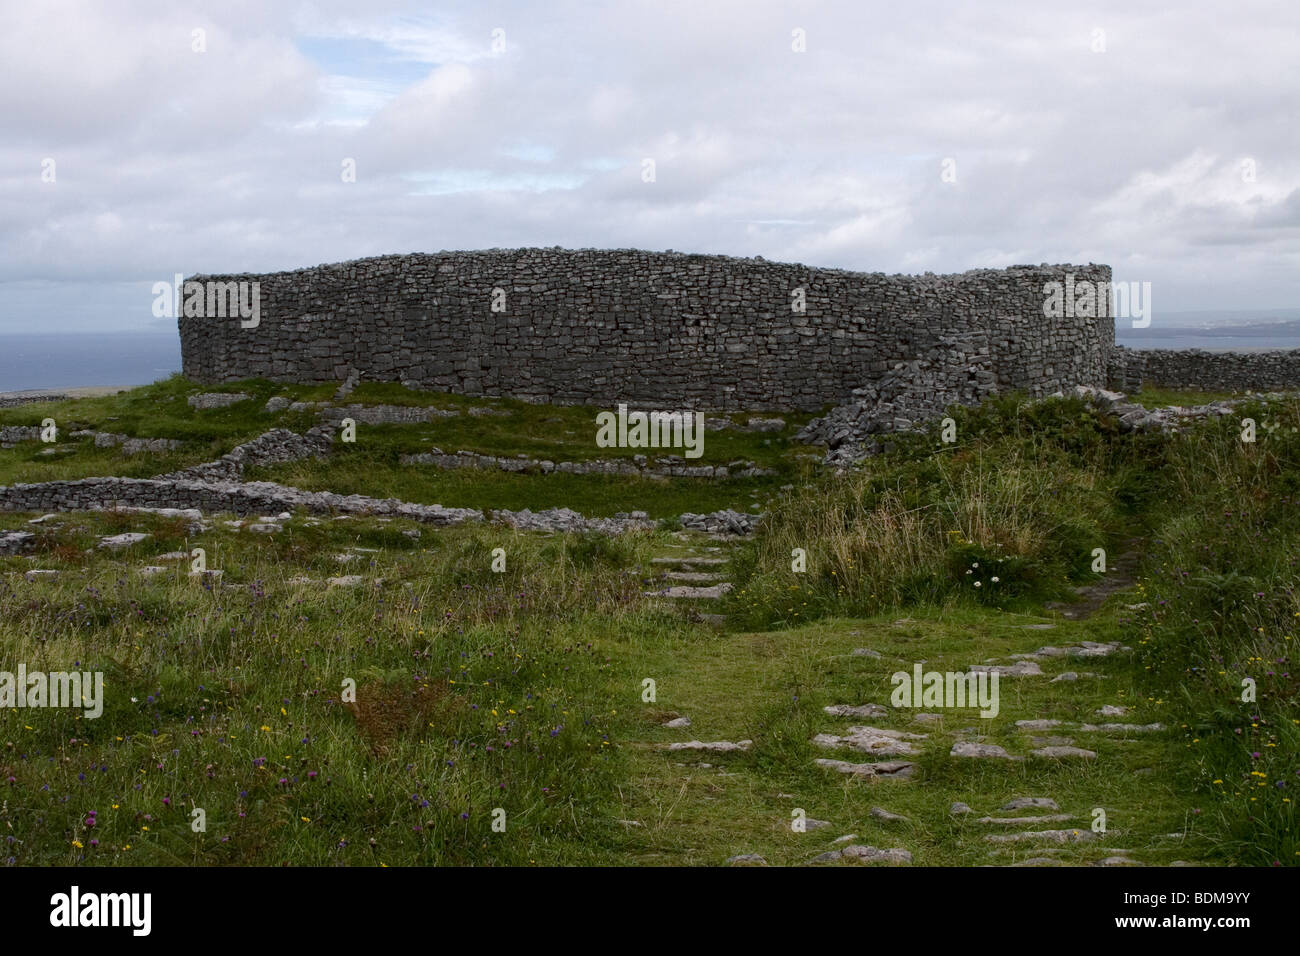 Old Fort constructed of stones, near lighthouse, Inis Mor (Inismore) Island, Aran Islands, County Galway, Ireland Stock Photo